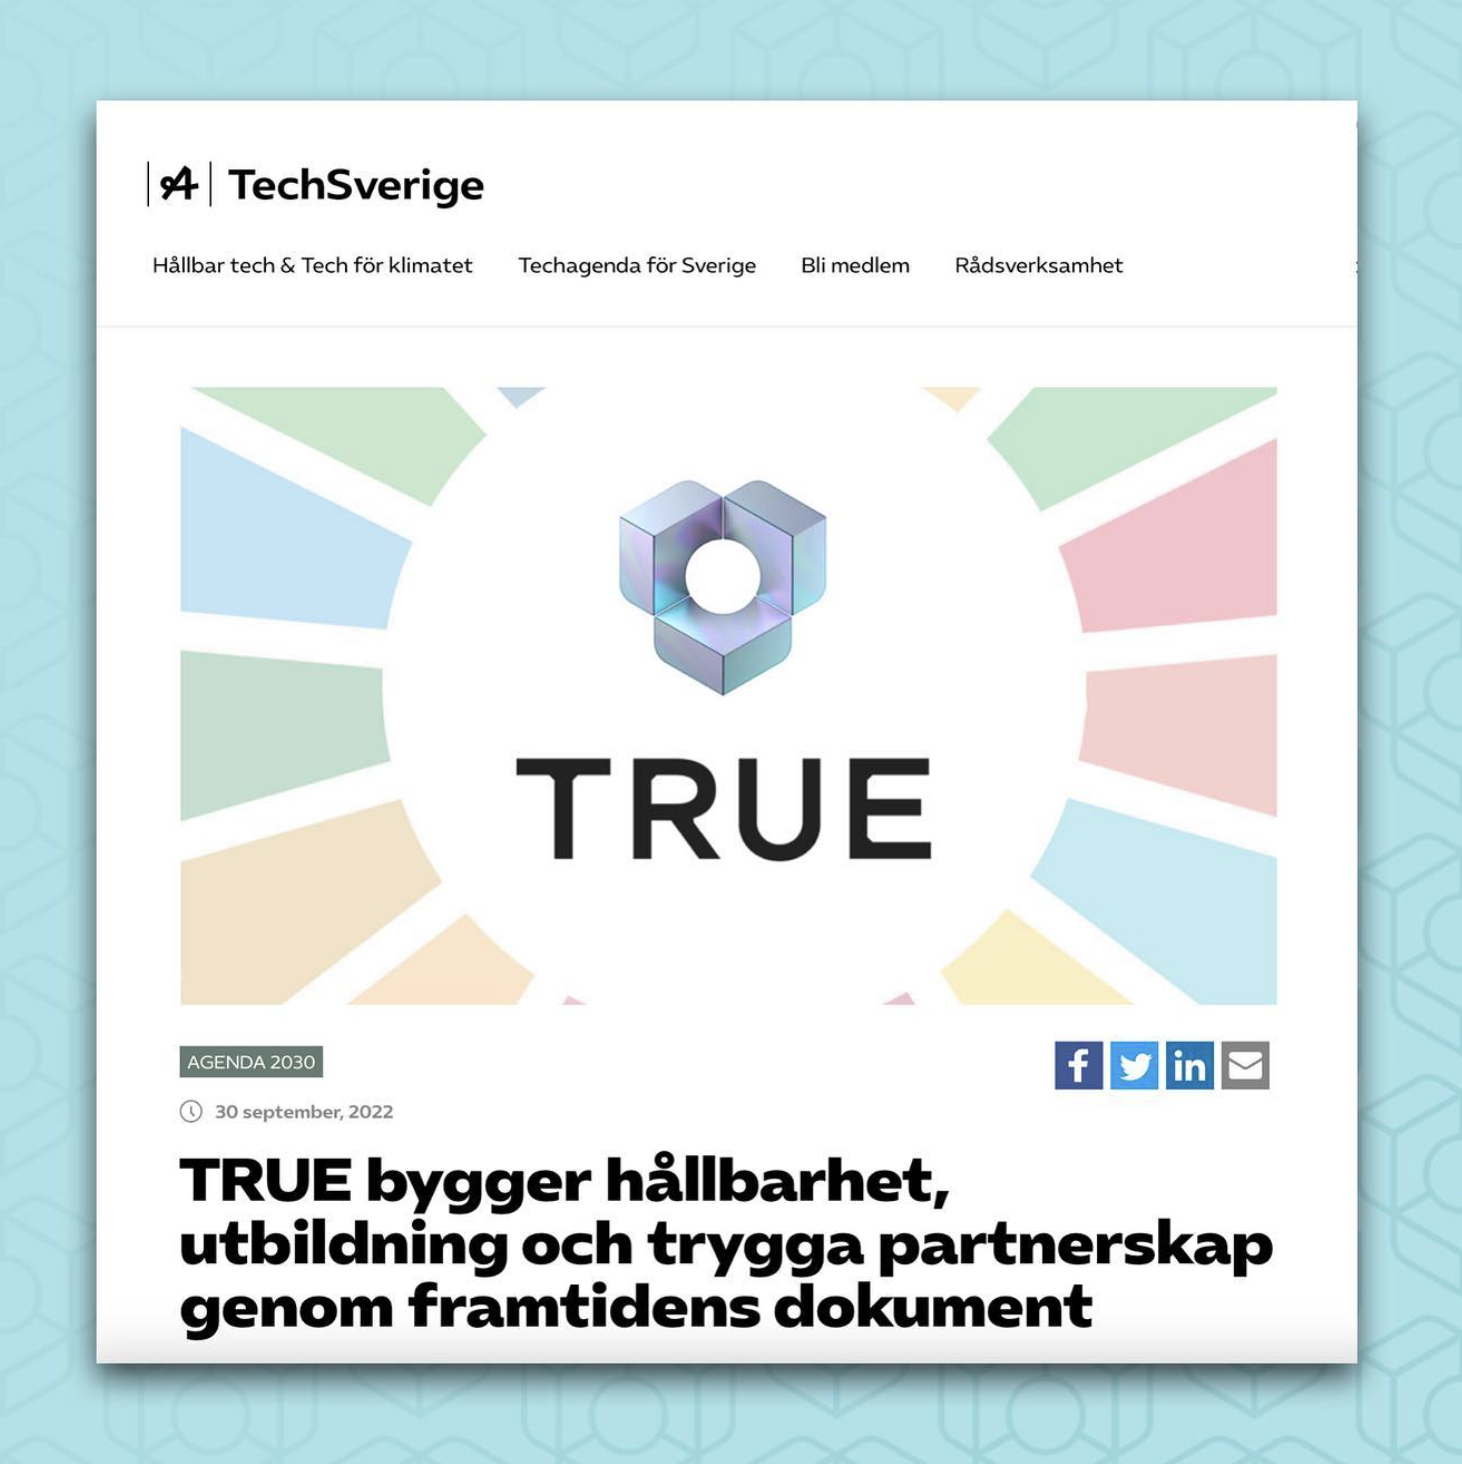 TRUE’s technology is used by Berghs School of Communication, IHM Business School and Stockholm School of Economics.